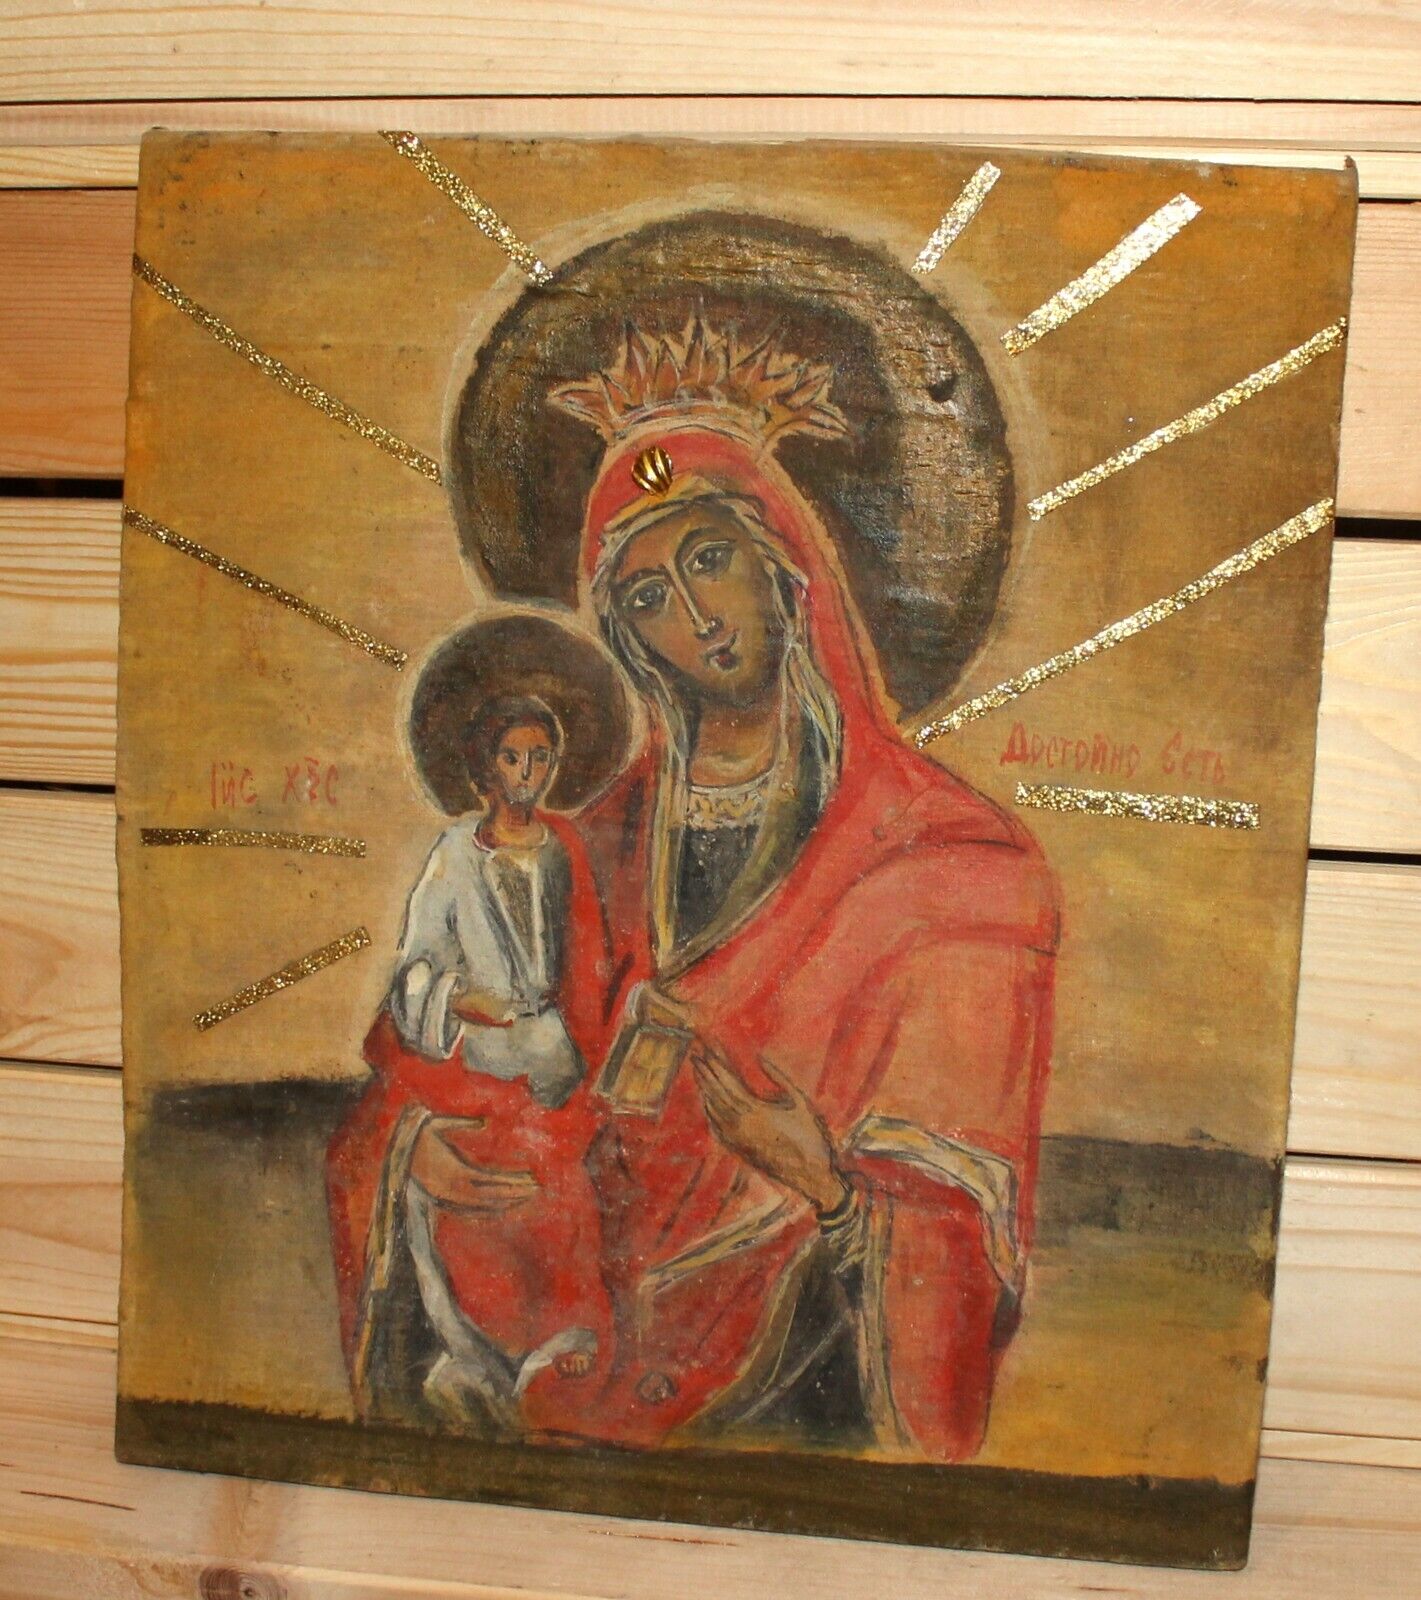 Vintage hand painted icon Virgin Mary Christ Child